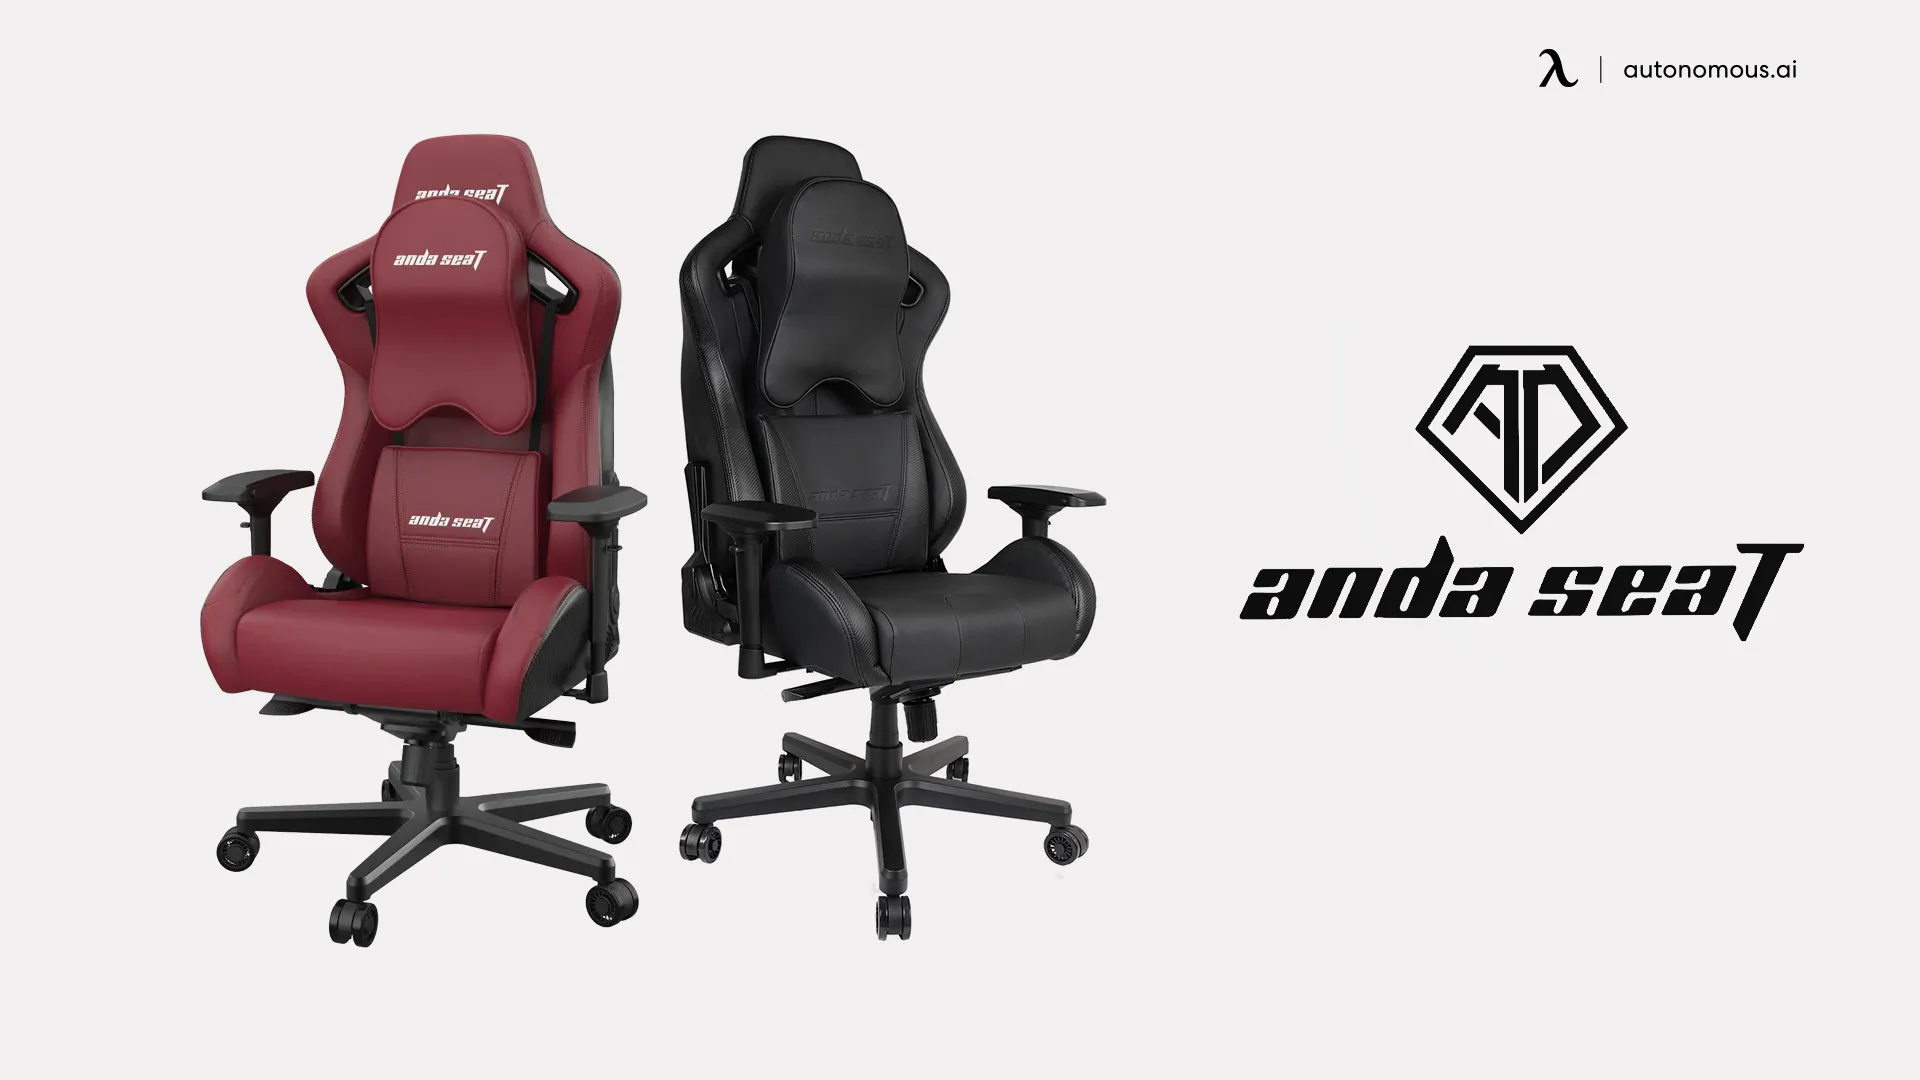 AndaSeat gaming chair brand